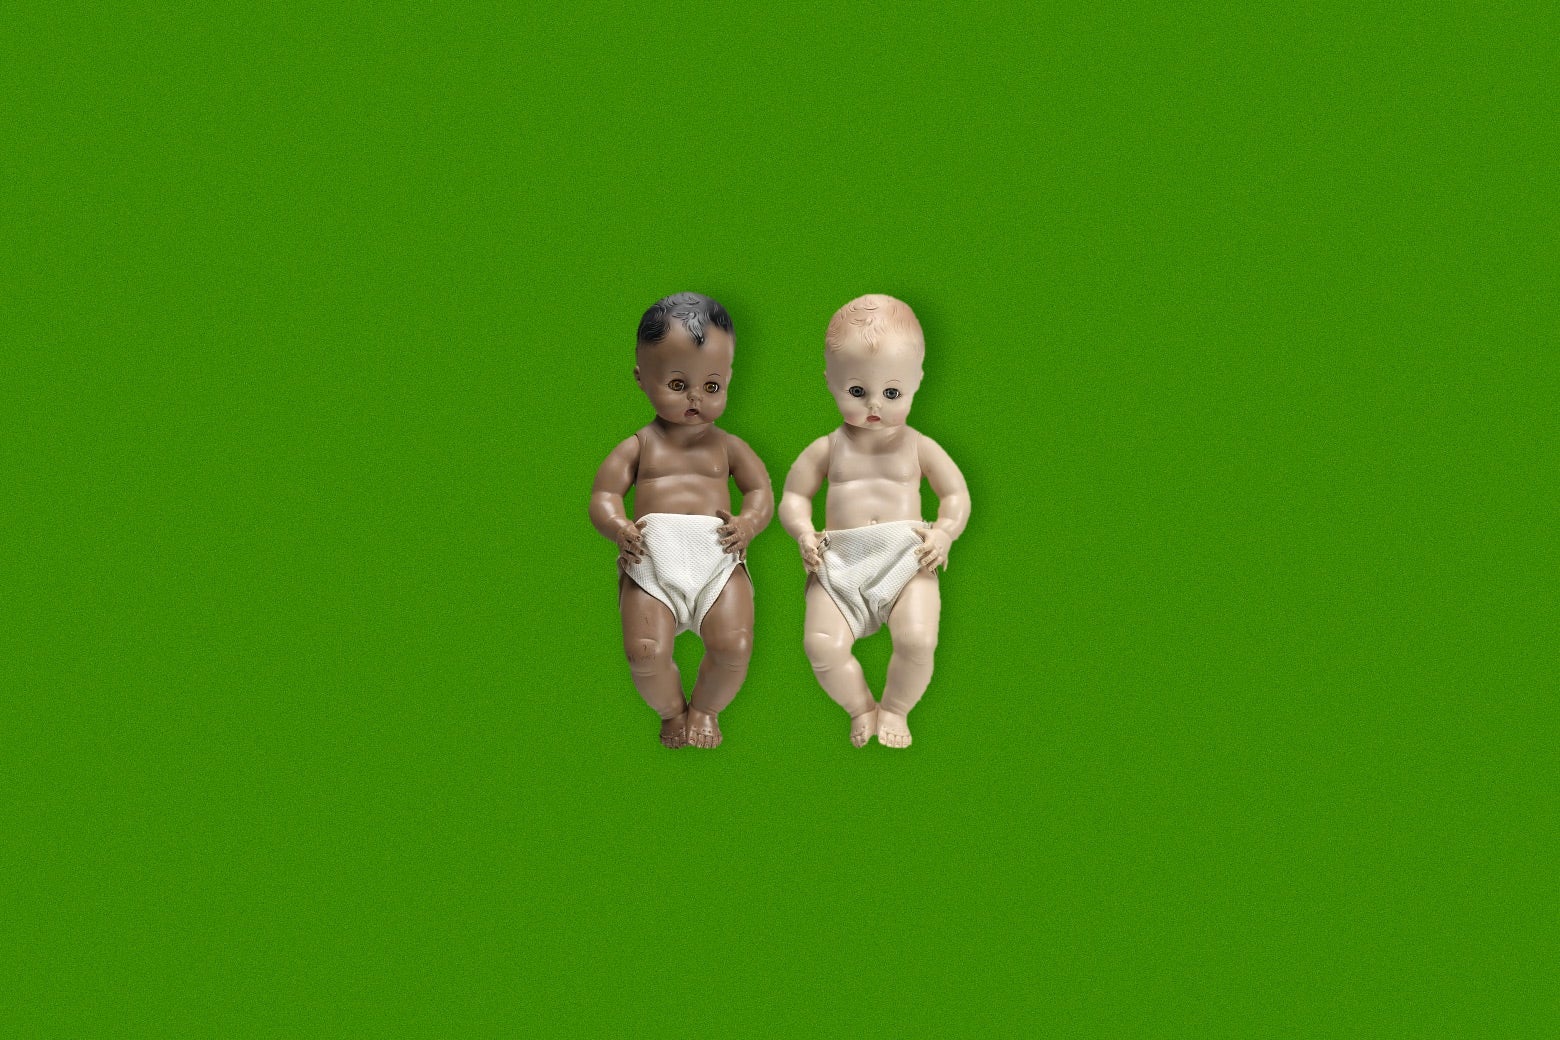 A Black baby doll and white baby doll